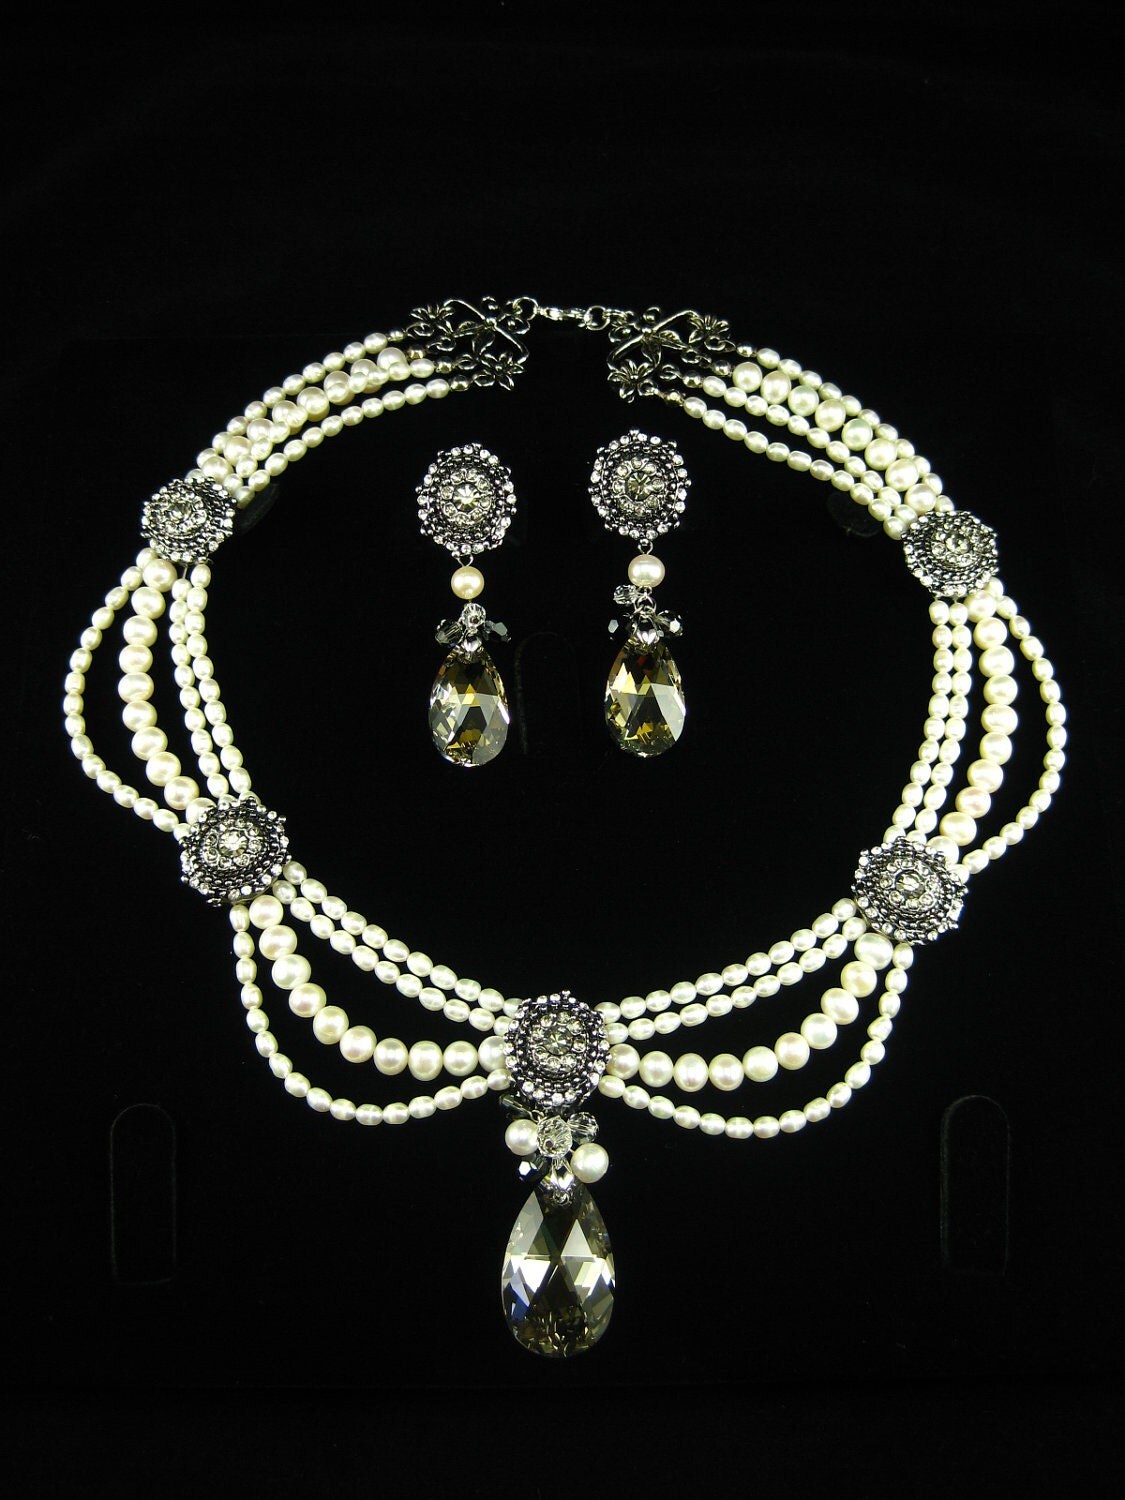 Victorian Inspired Bridal Jewelry Set Make to order